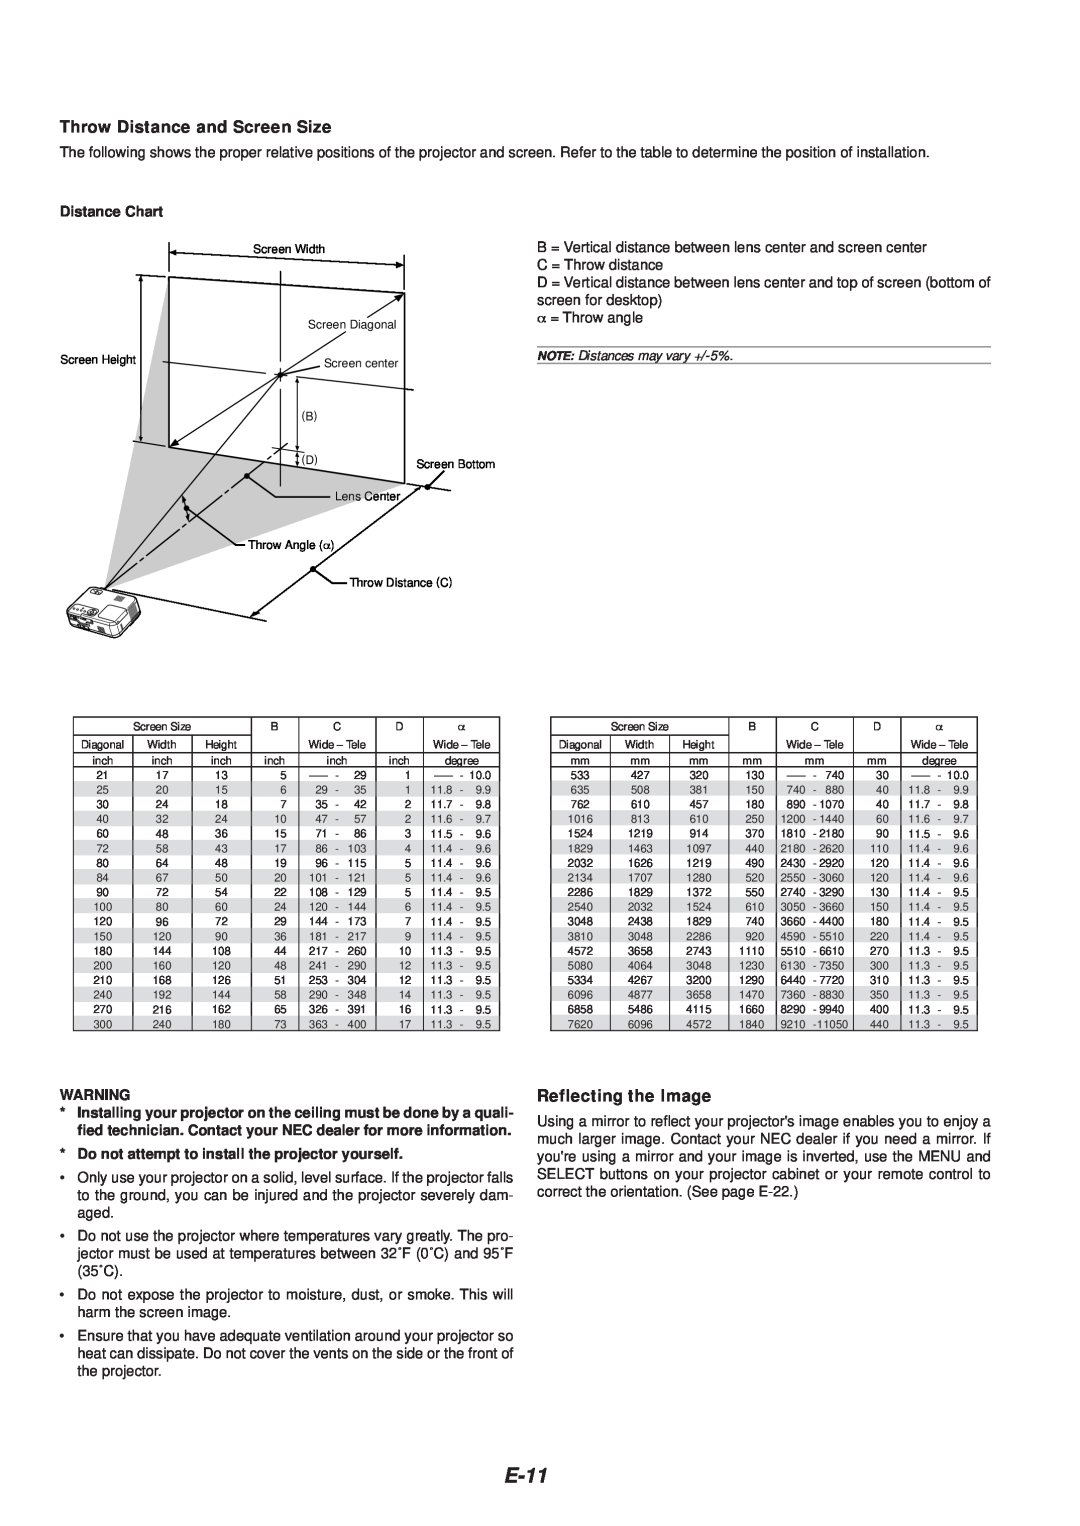 NEC VT46 user manual E-11, Throw Distance and Screen Size, Reflecting the Image, Distance Chart 